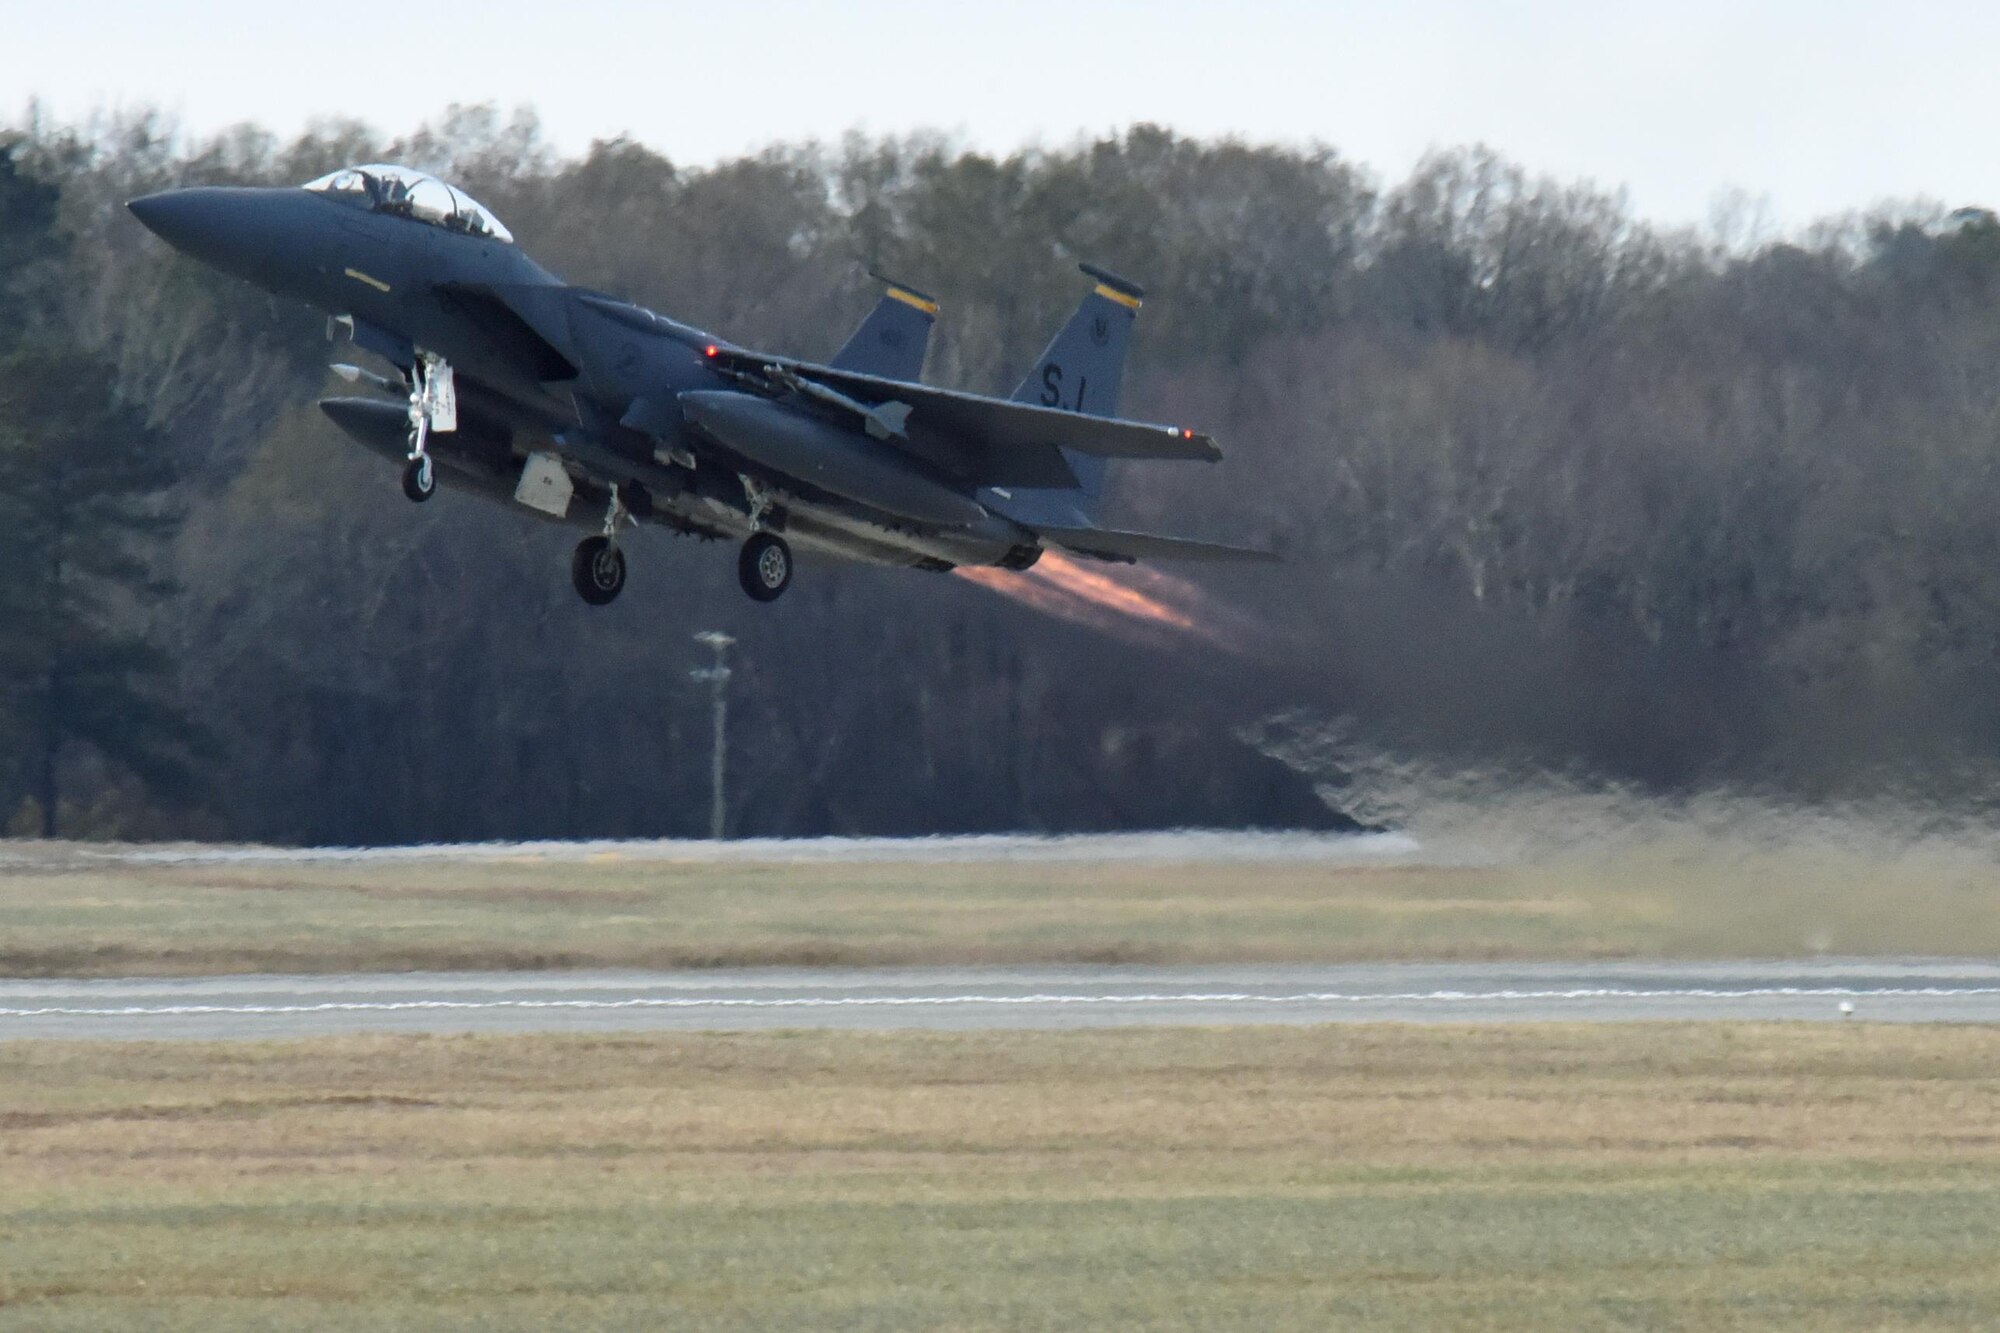 An F-15E Strike Eagle takes off to participate in Razor Talon, Dec. 16, 2016, at Seymour Johnson Air Force Base, North Carolina. The monthly exercise allows service members unique opportunities for a large-force training exercise for joint East Coast tactical and support aviation units. (U.S. Air Force photo by Airman Miranda A. Loera)